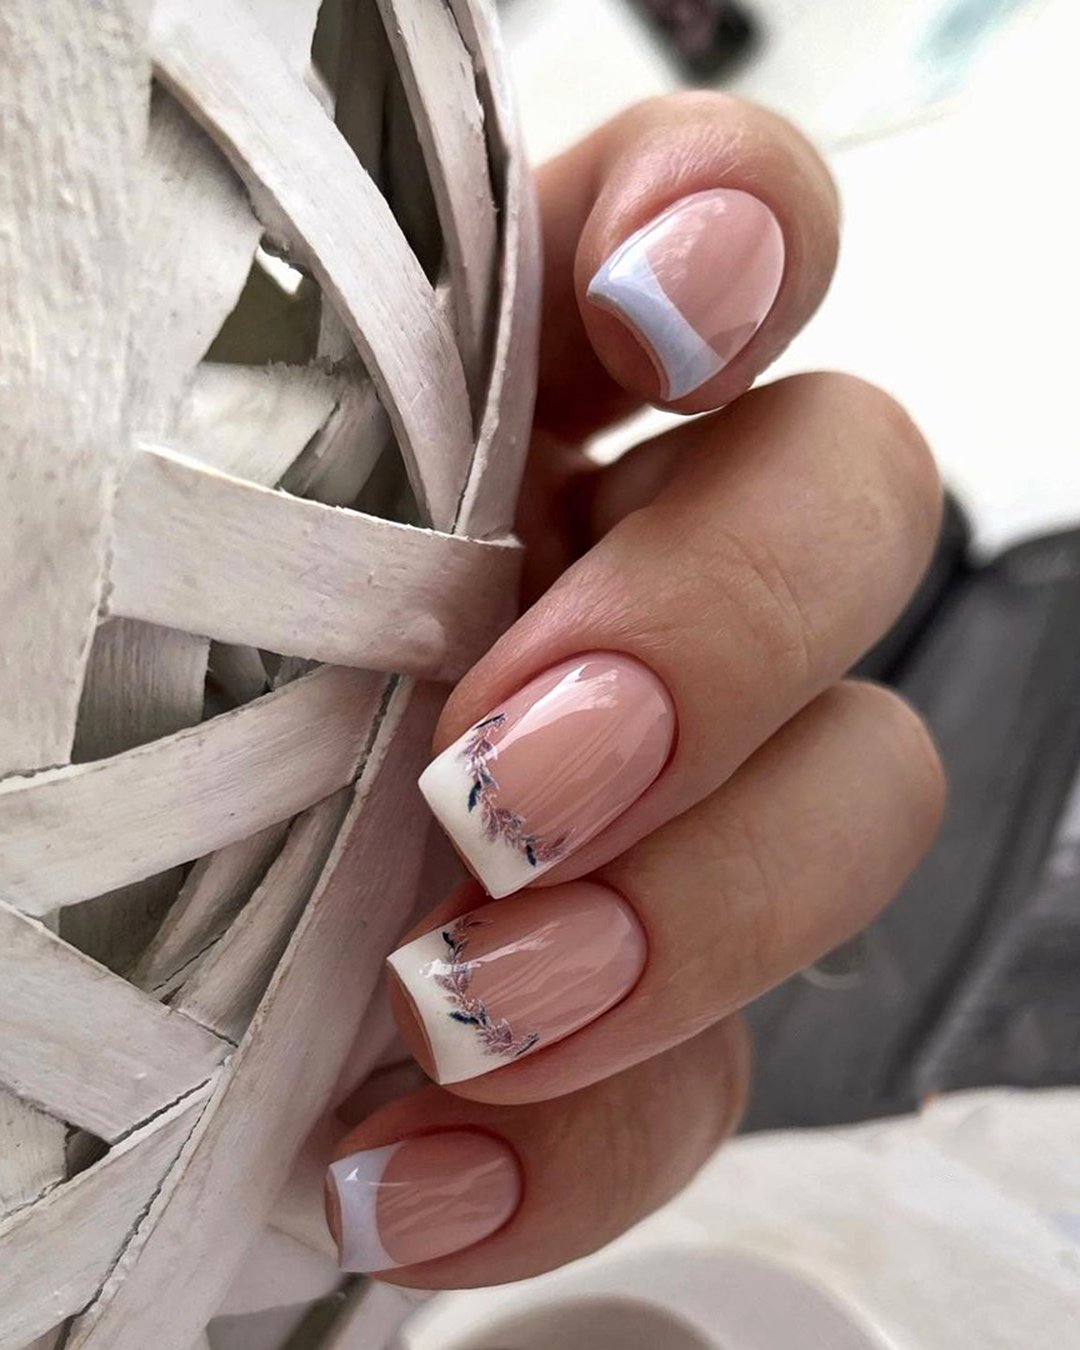 nail design bridal ideas for wedding french mails with flowers 1masternails